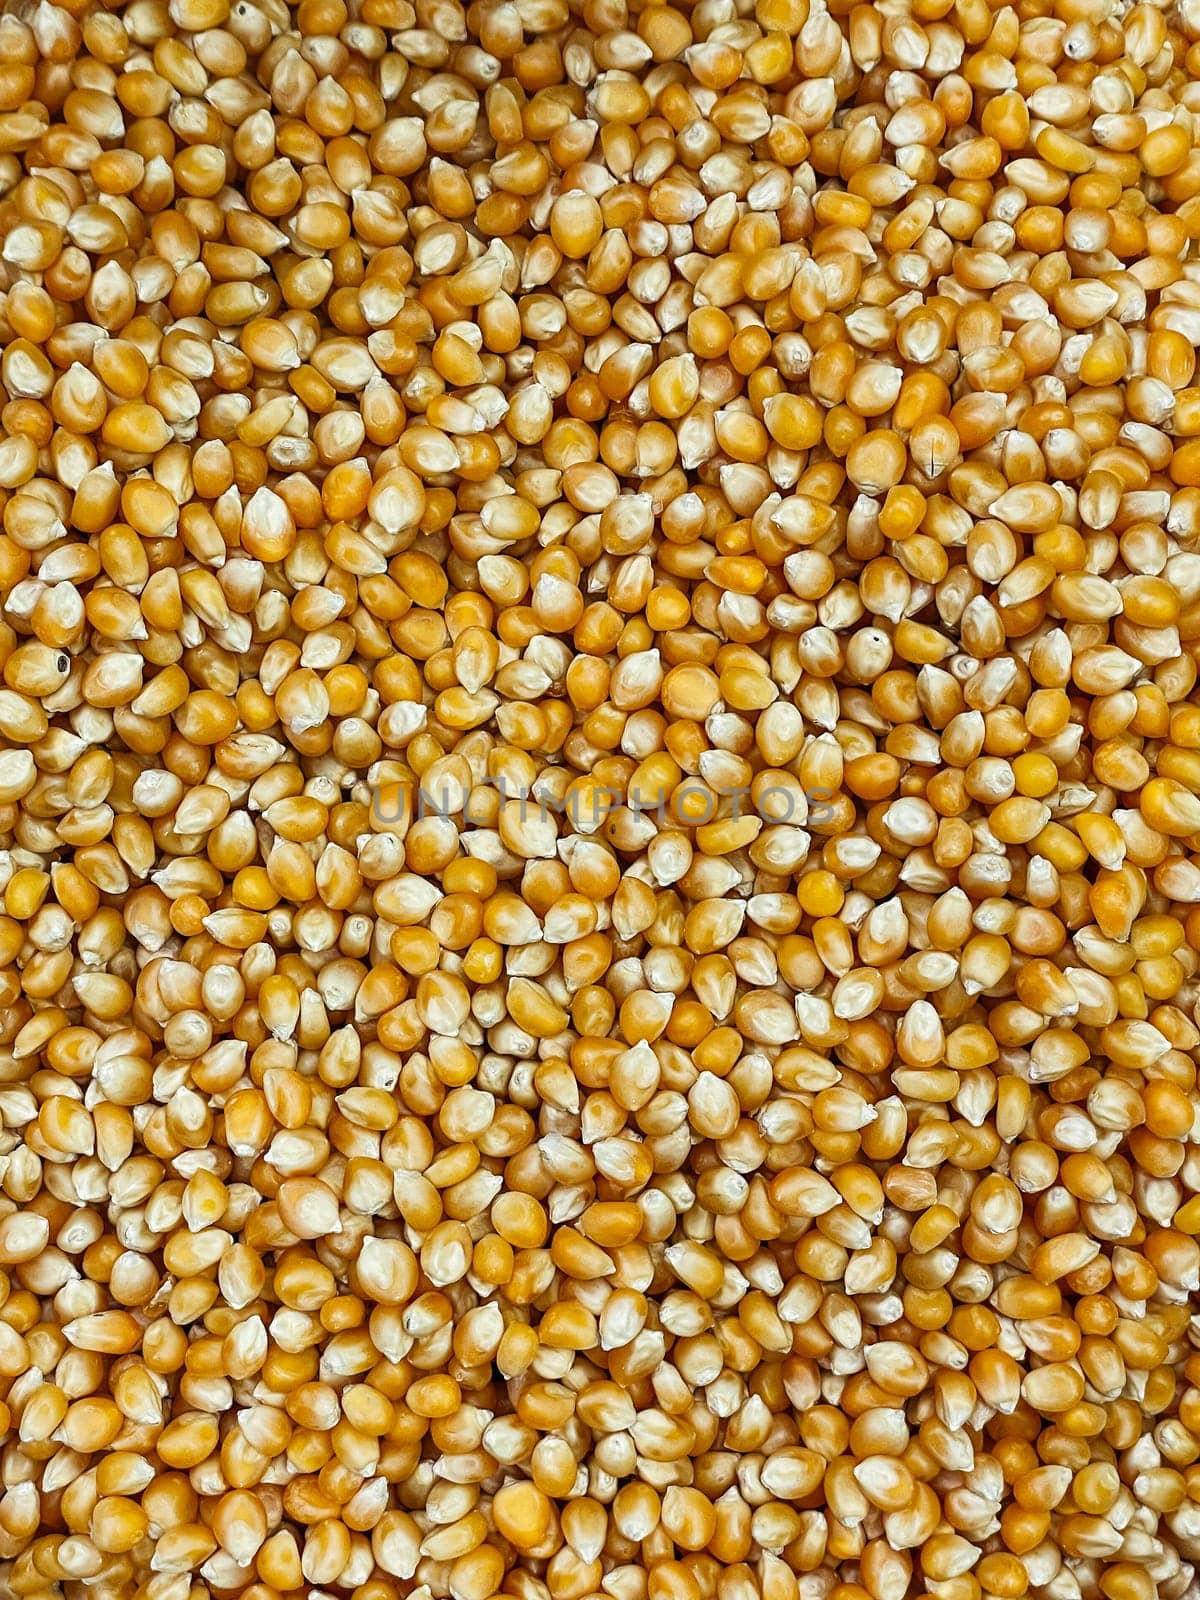 corn seed kernels for cooking as background